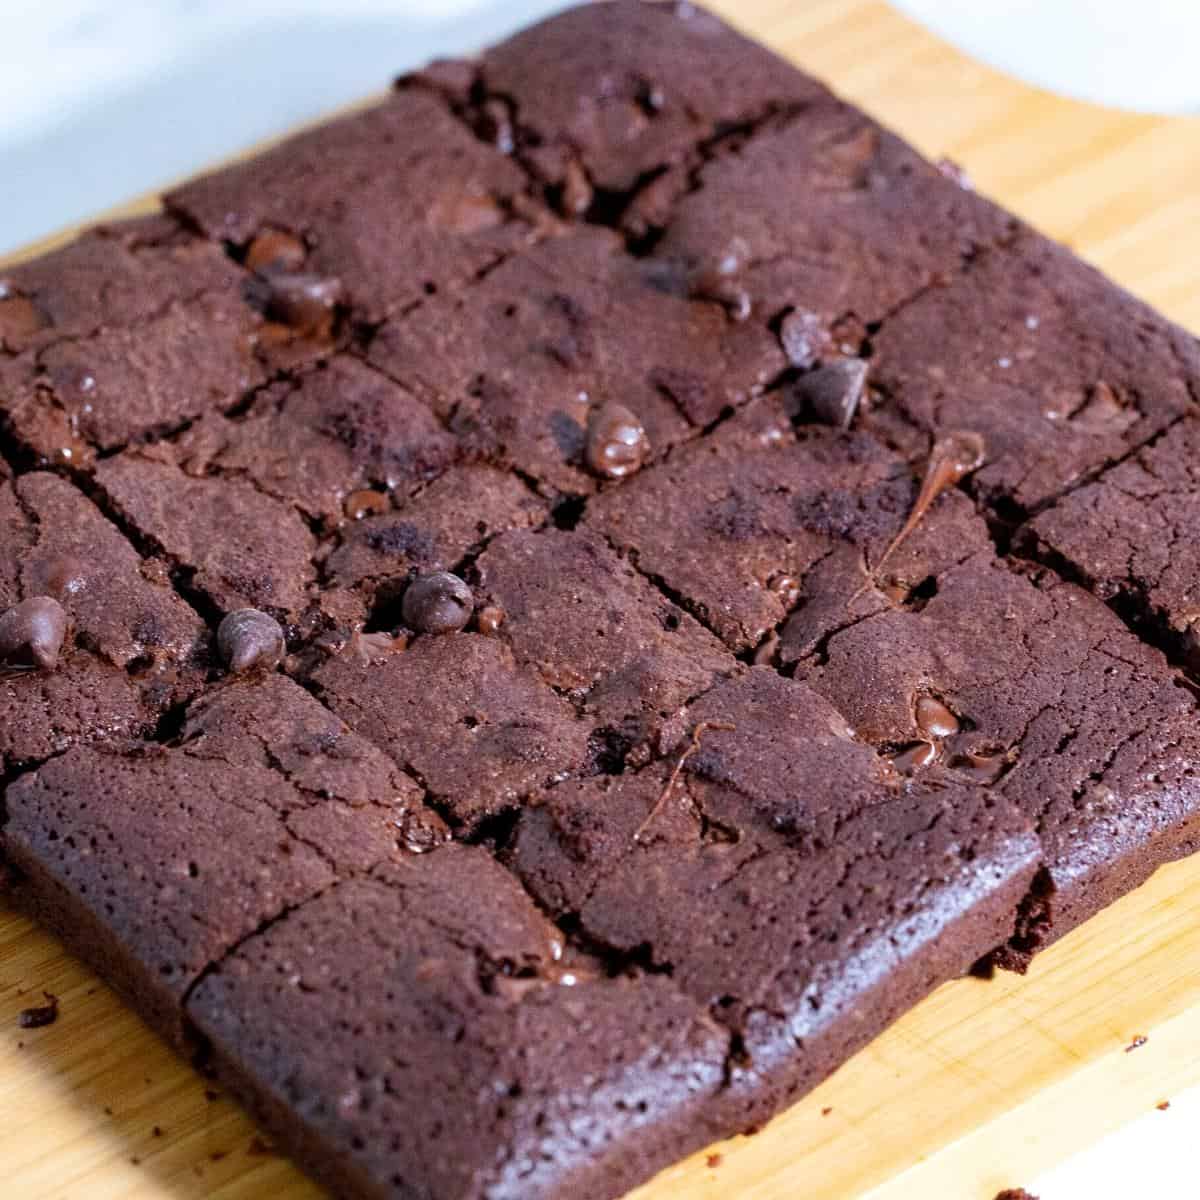 A slab of sliced brownies on a the table.